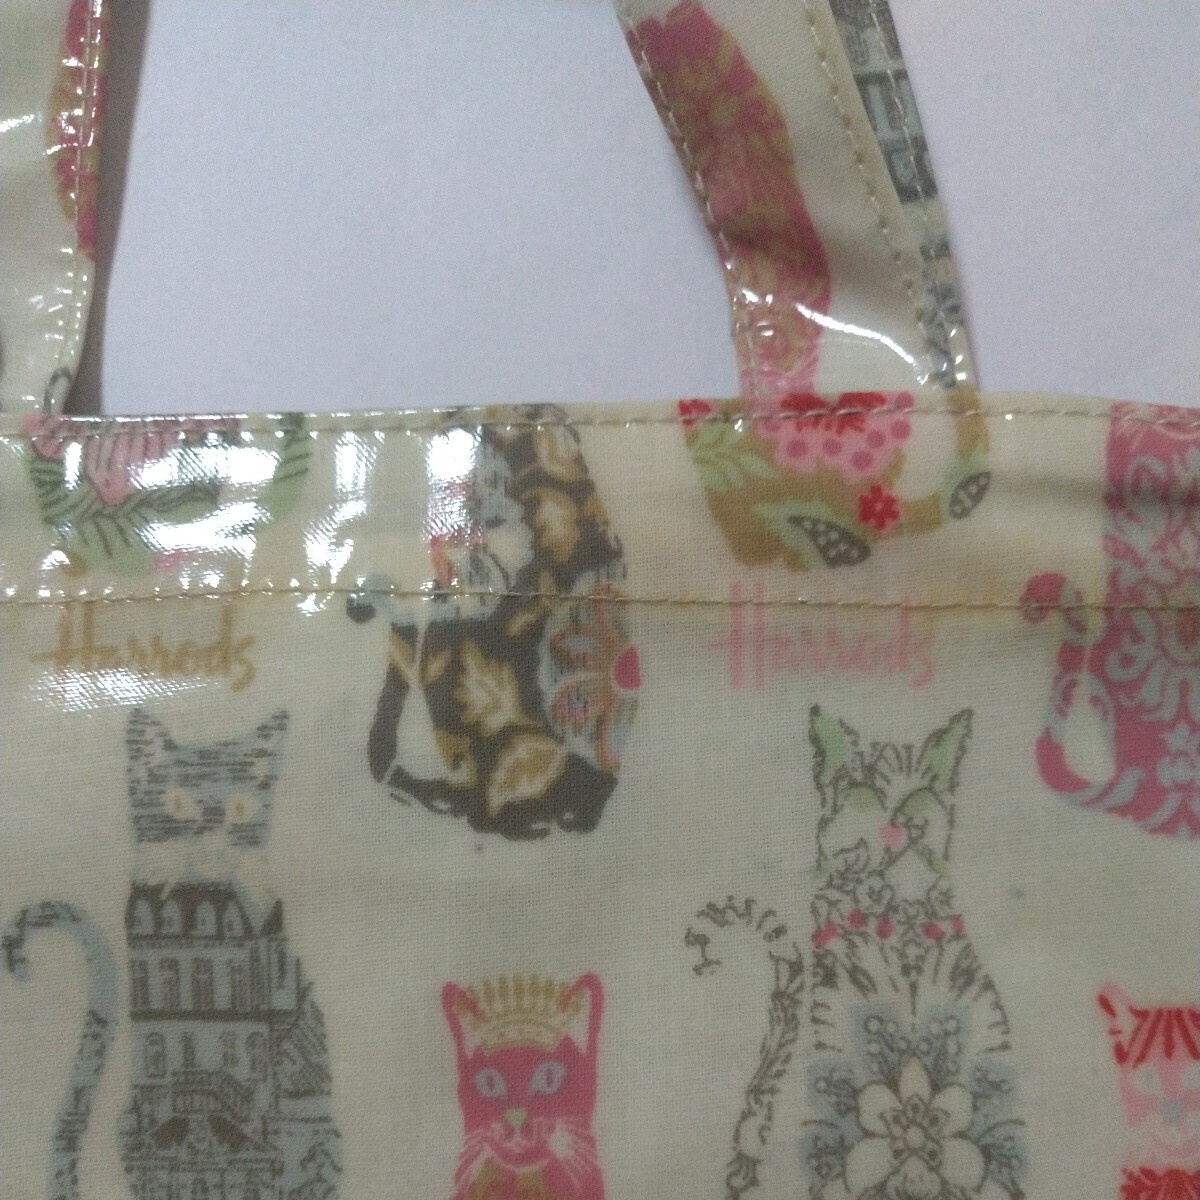 *Harrods Harrods tote bag cat pattern .. cat dirt equipped free shipping *